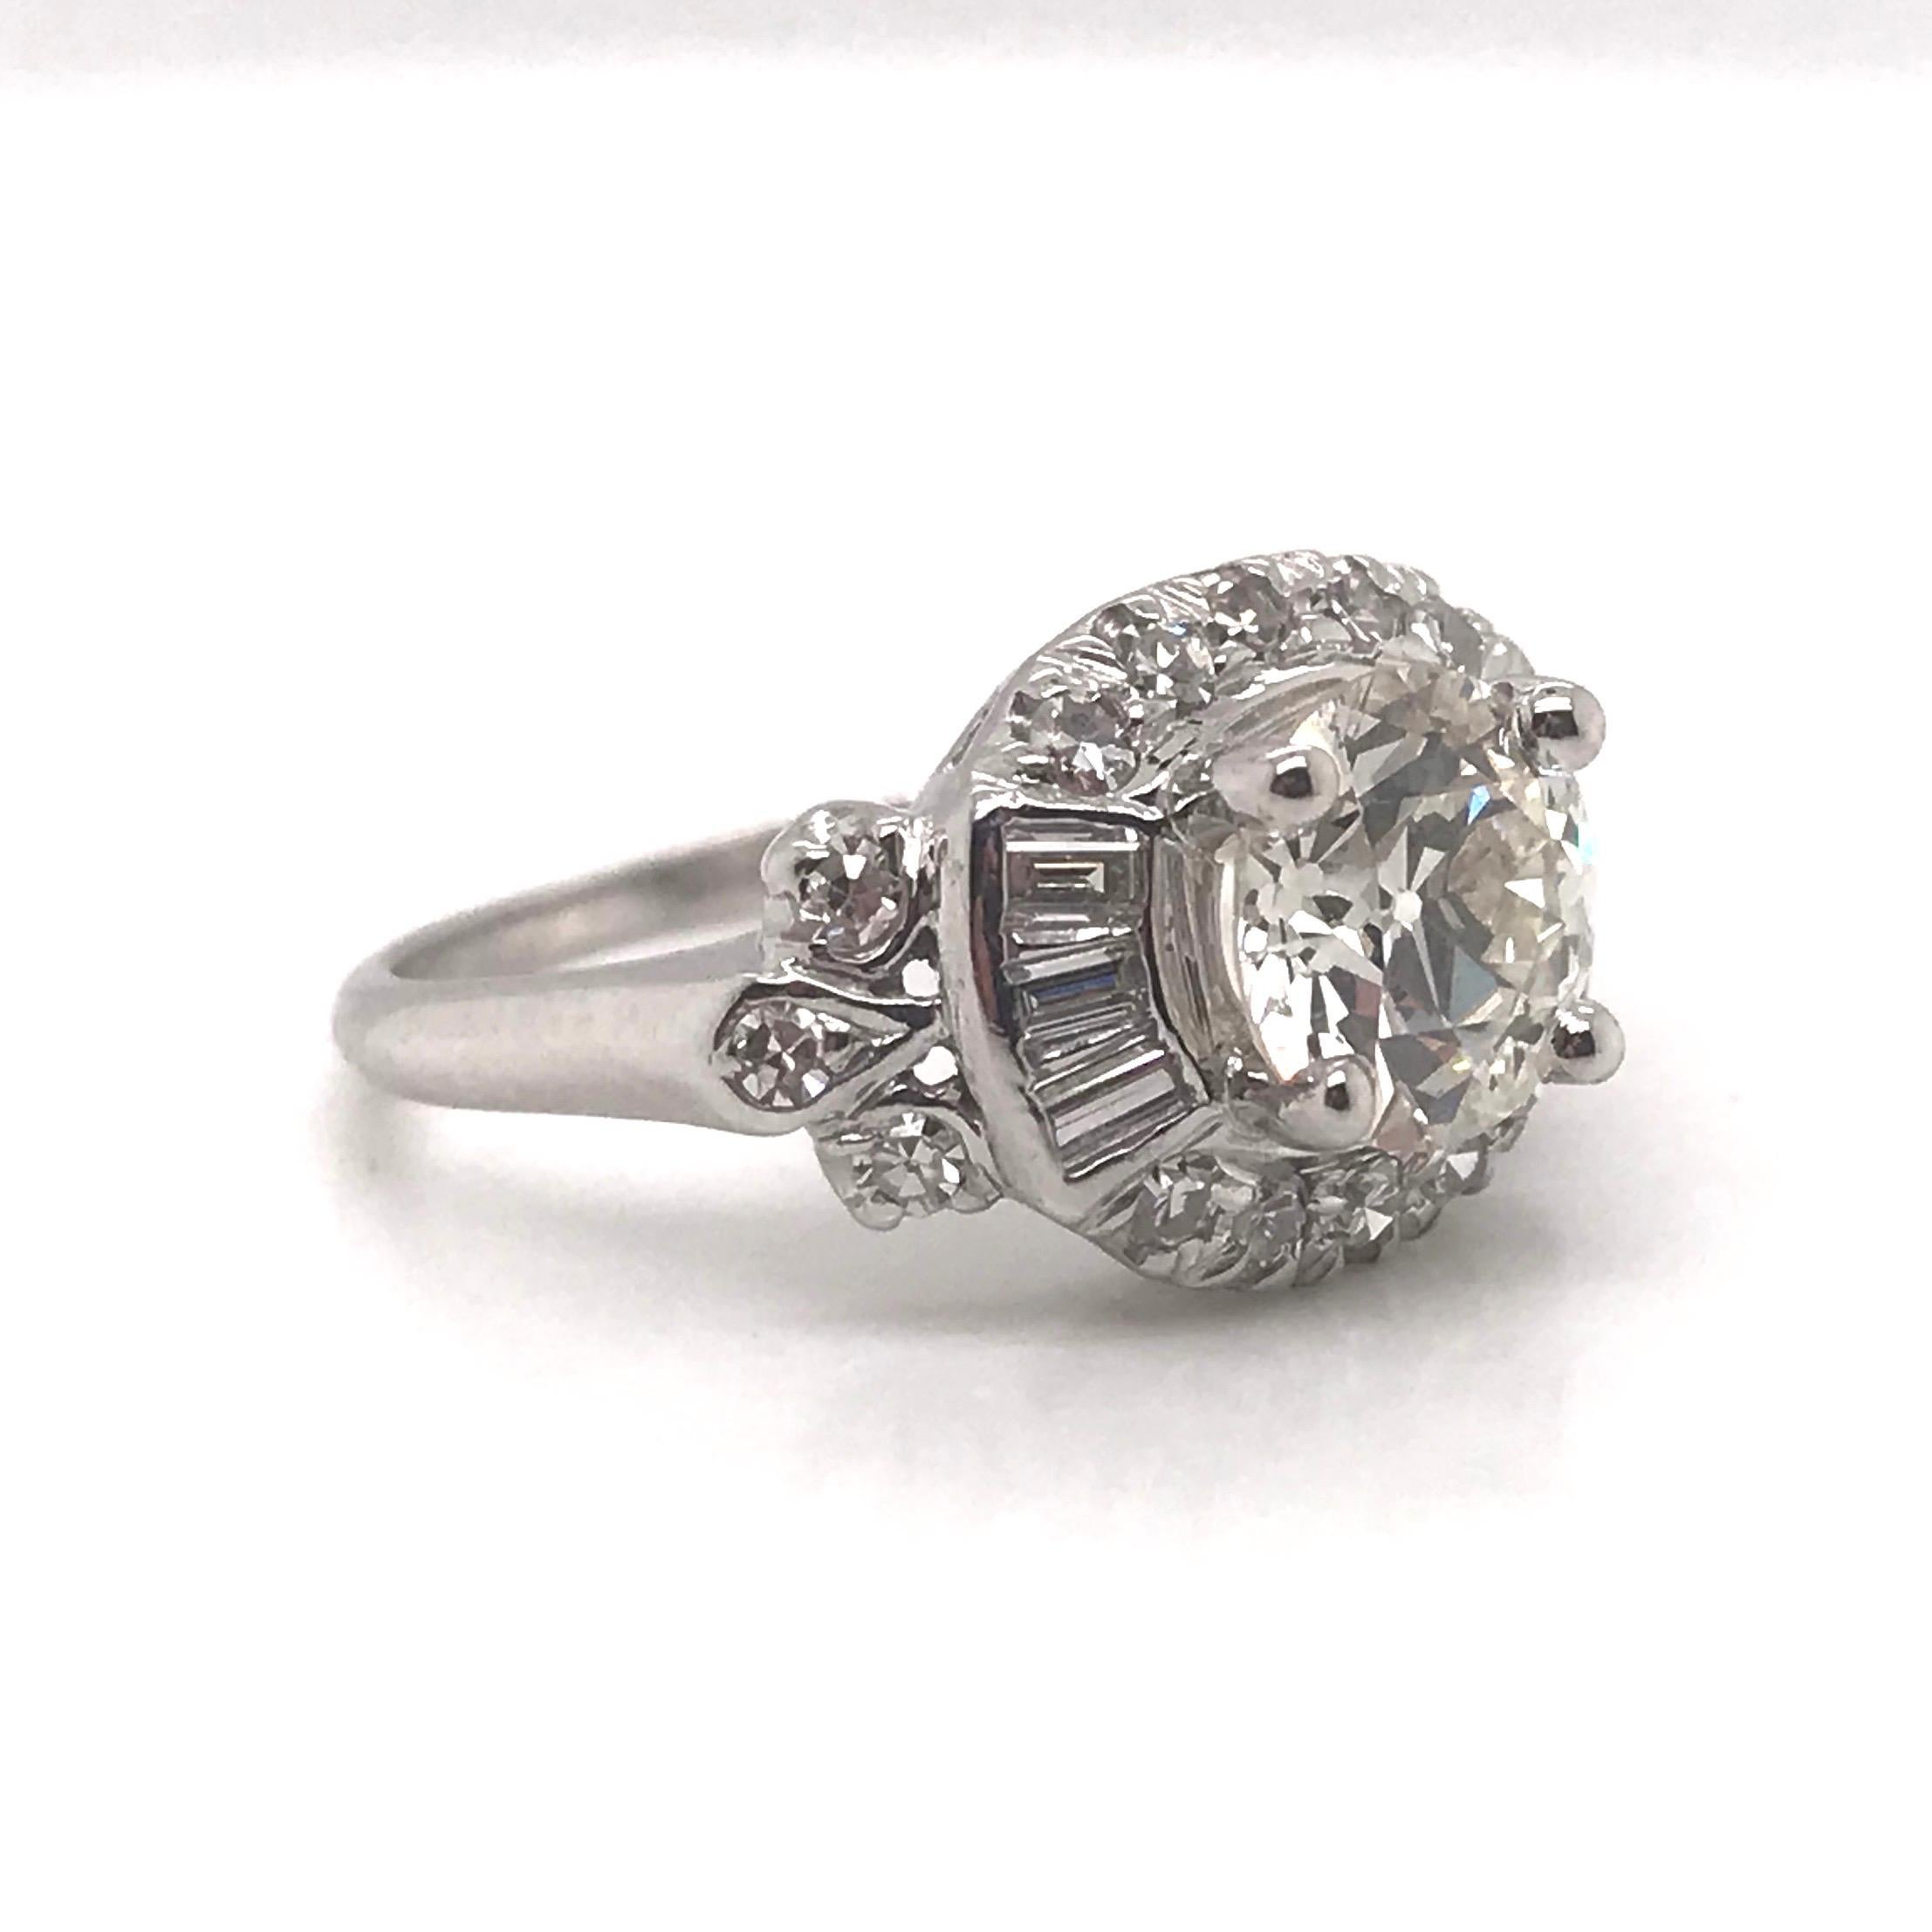 This beautiful ring was crafted sometime during the Retro Era, (1940 - 1960).  The setting is 14K white gold accented by 16 smaller round cut diamonds & 6 baguette shaped diamonds. The center GIA certified diamond is a gorgeous 1.41 Carat OLD